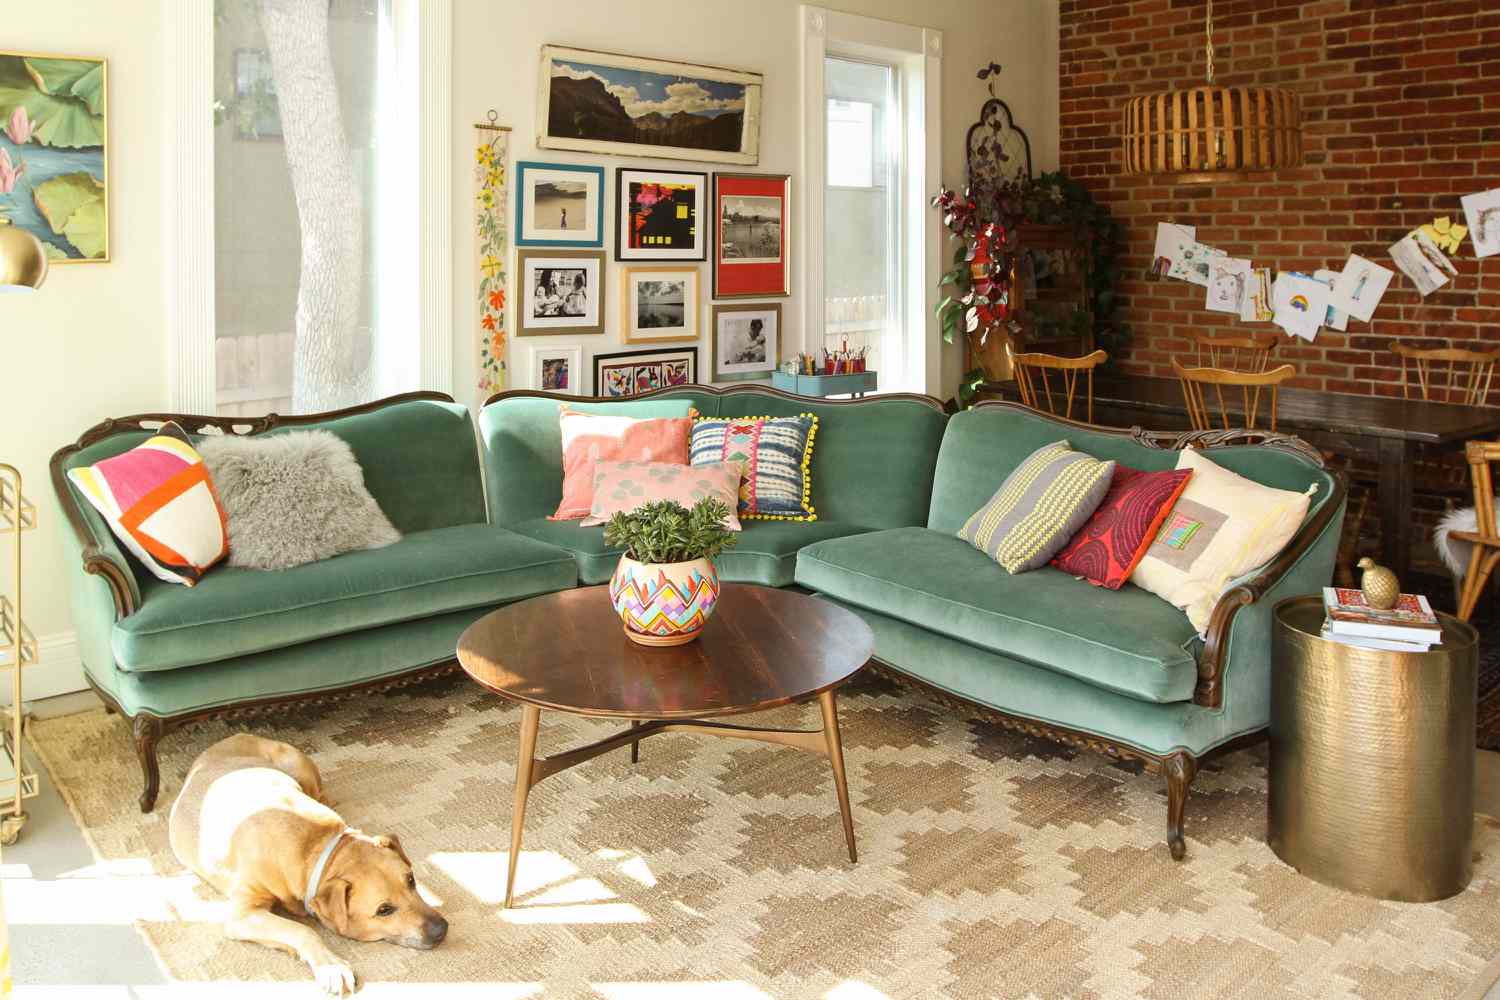 Teal vintage couch covered with patterned throw pillows in living room